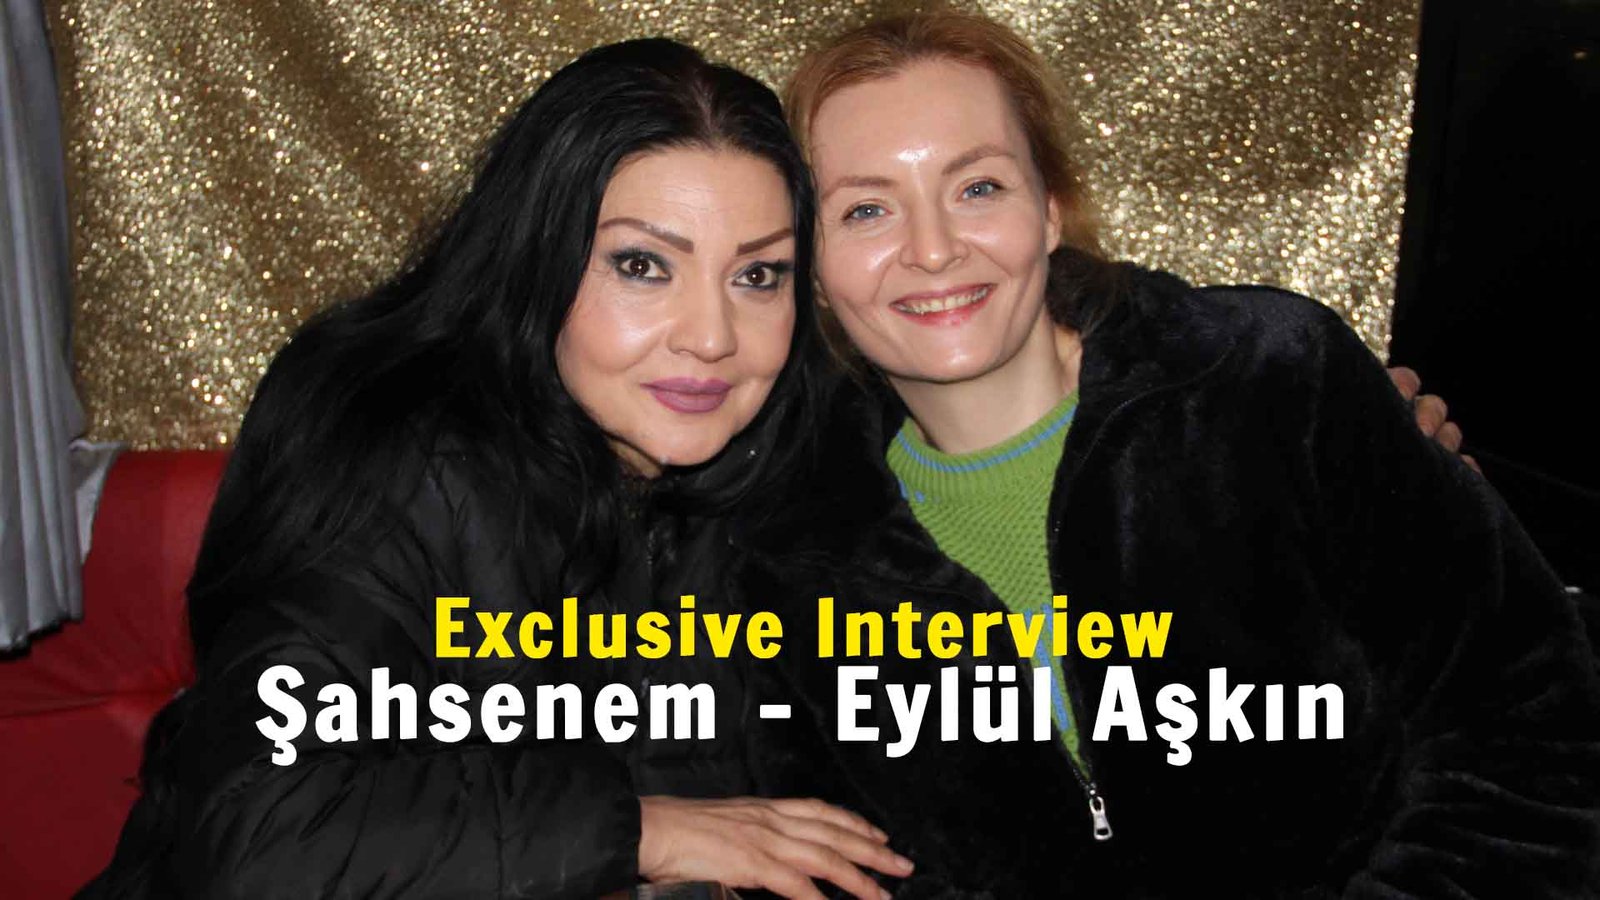 Starring Sylvester Stallone The Offer That Şahsenem Had To Refuse, Eylul Askin Exclusive Interview 3